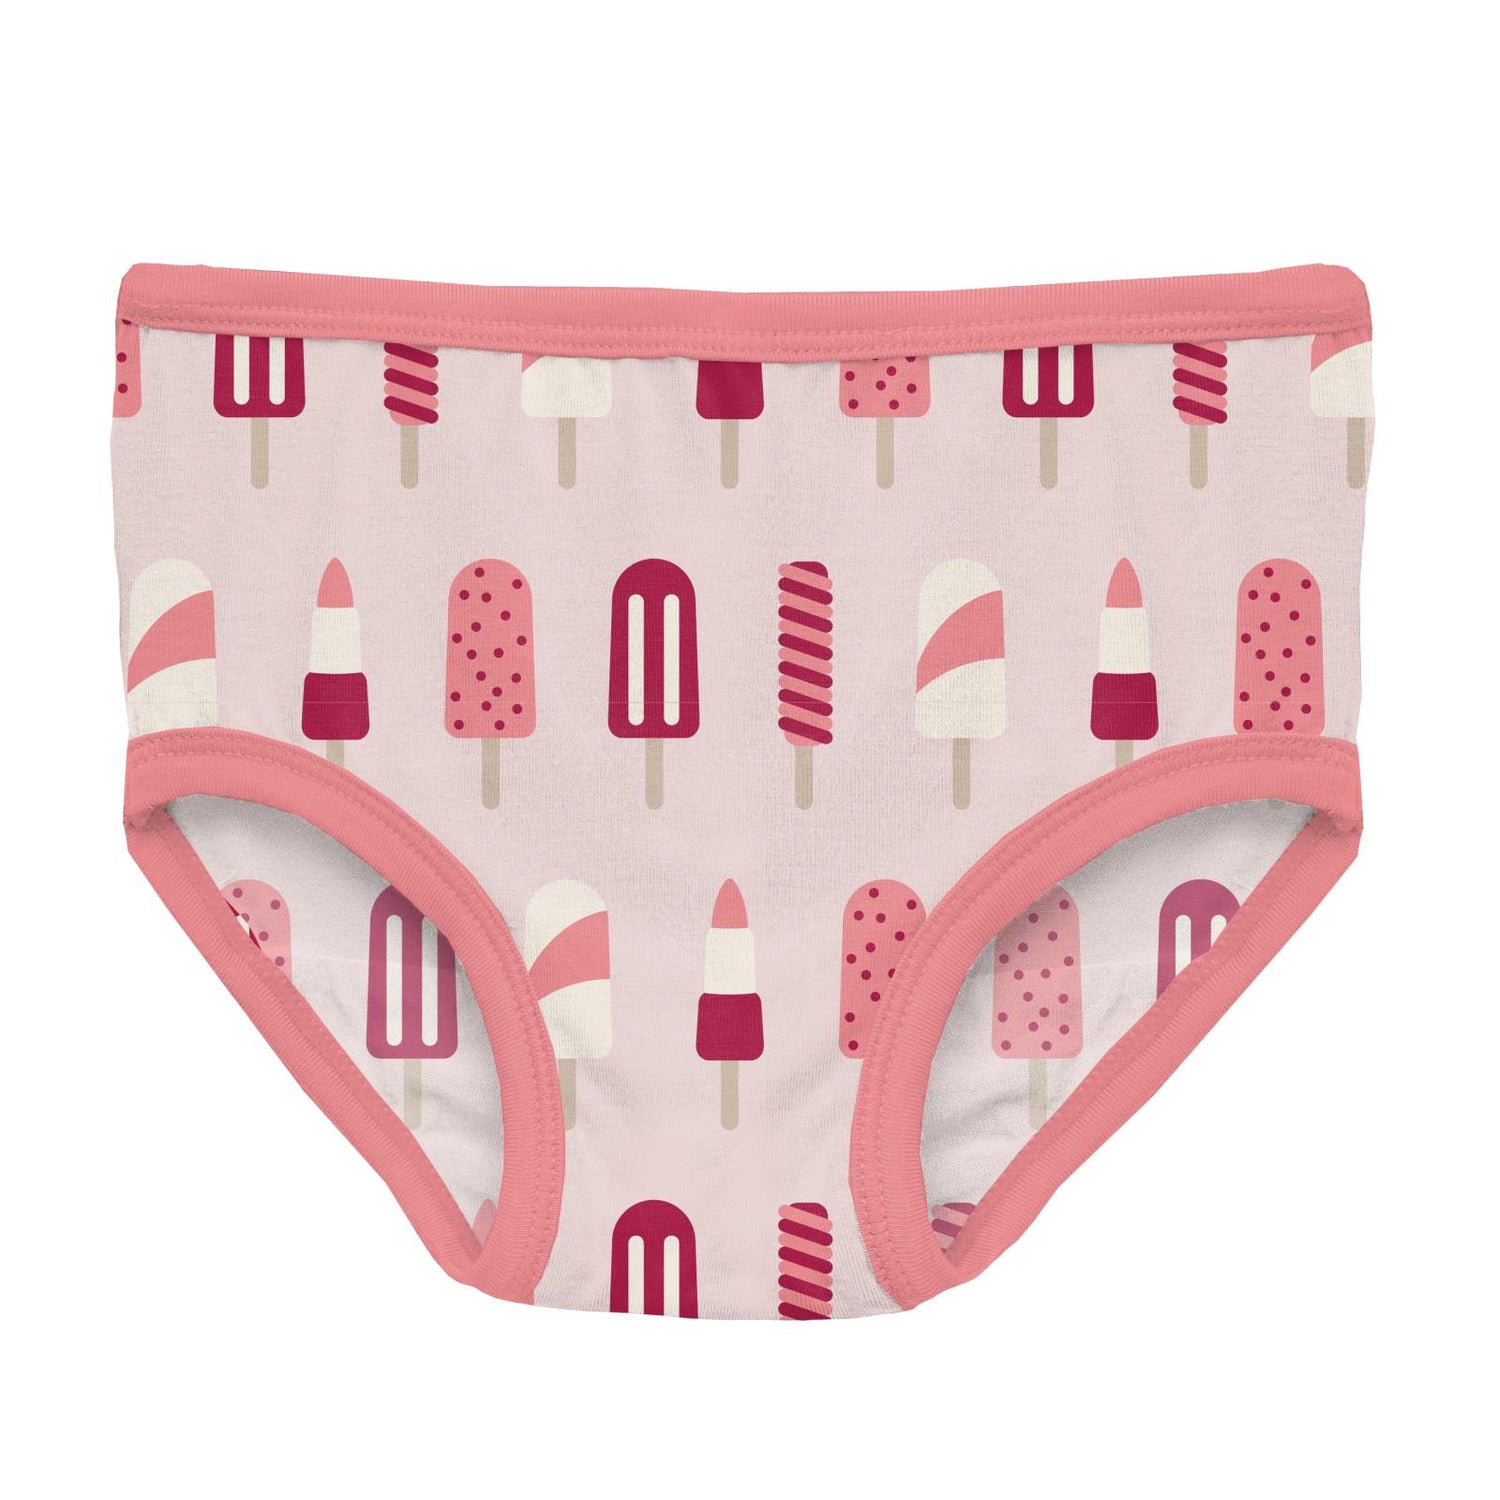 Print Underwear Set of 3 in Strawberry Sharky, Macaroon and Macaroon Popsicles